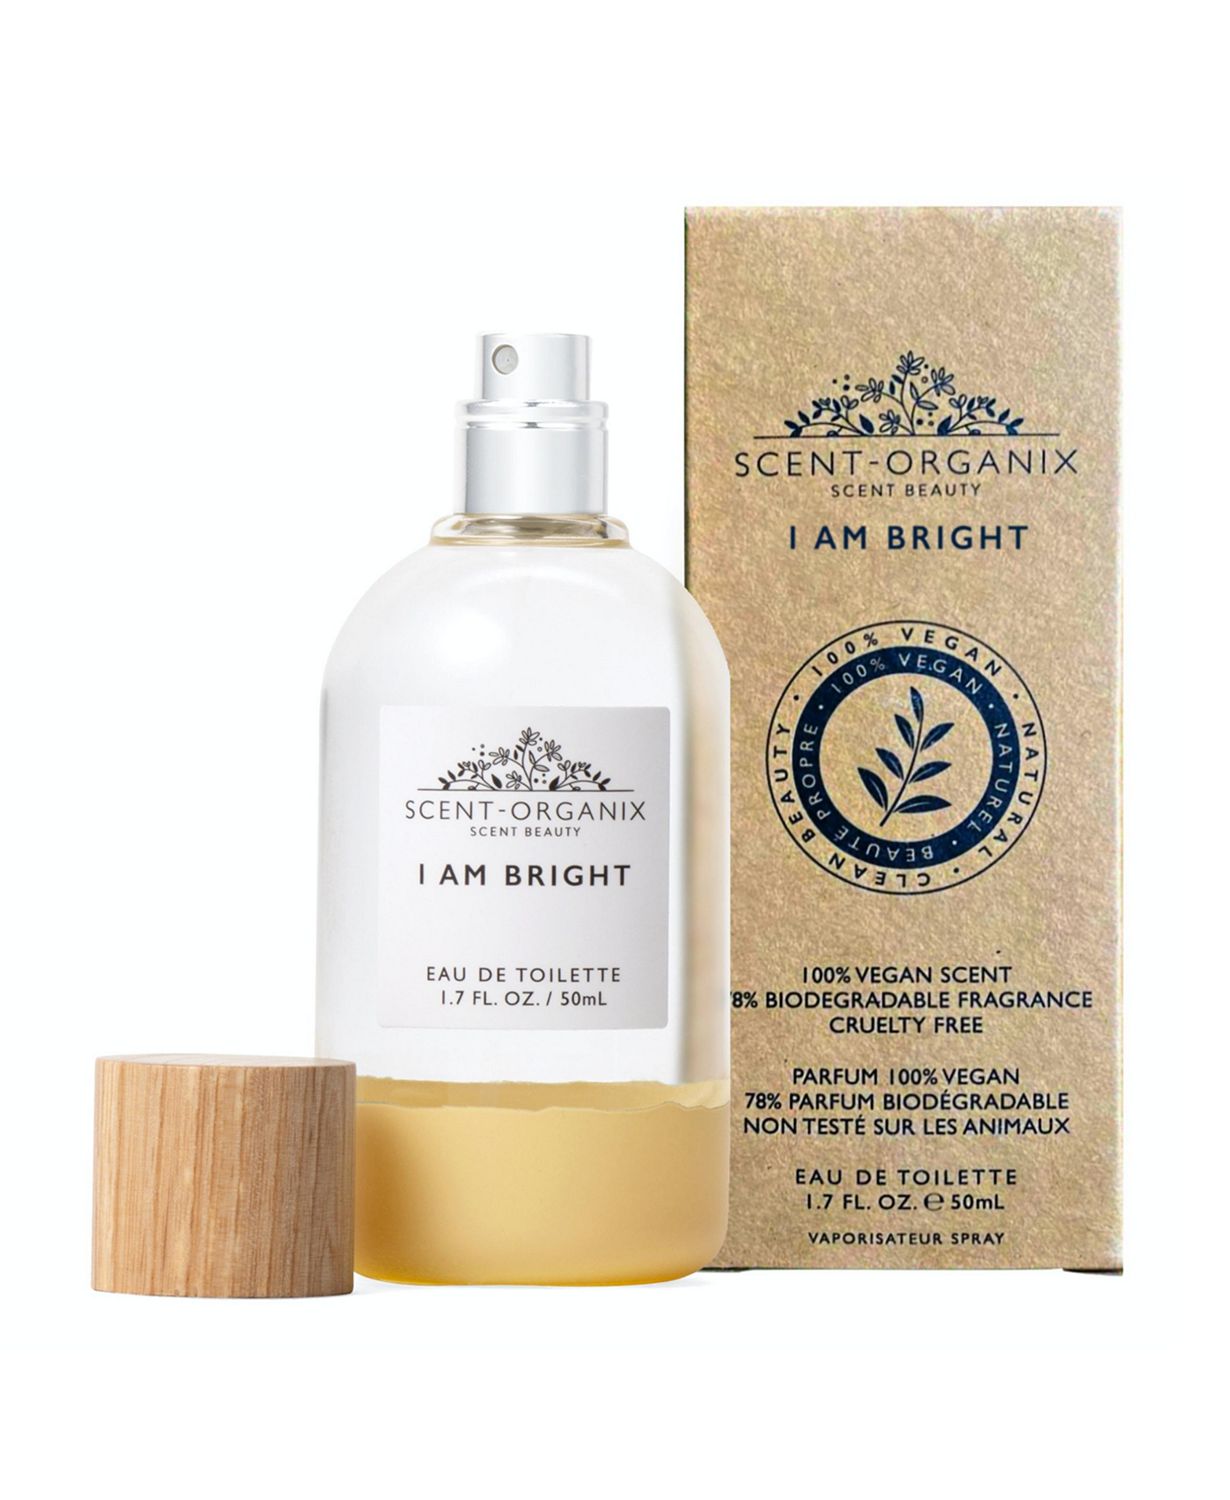 Scent-Organix I Am Bright Perfume for Men & Women Fruity and Citrusy Scent with Notes of Pineapple, Tiare Flower & Orange Flower - Non-Toxic Perfume - 1.7fl Oz